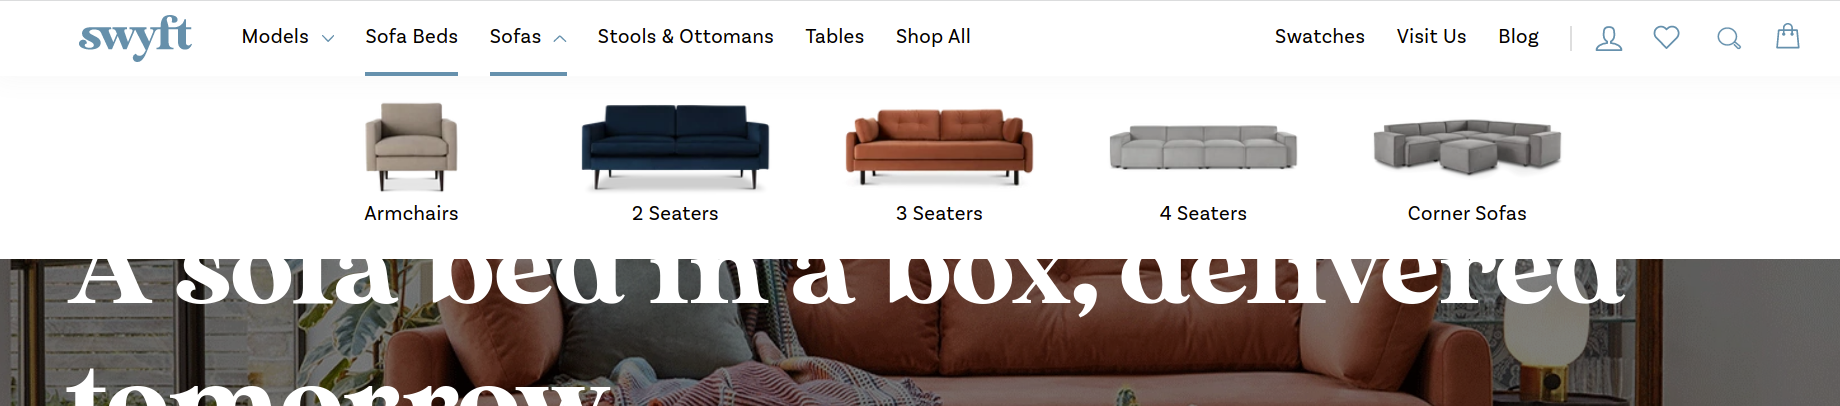 Using categories and sub categories in header navigation for eCommerce sites